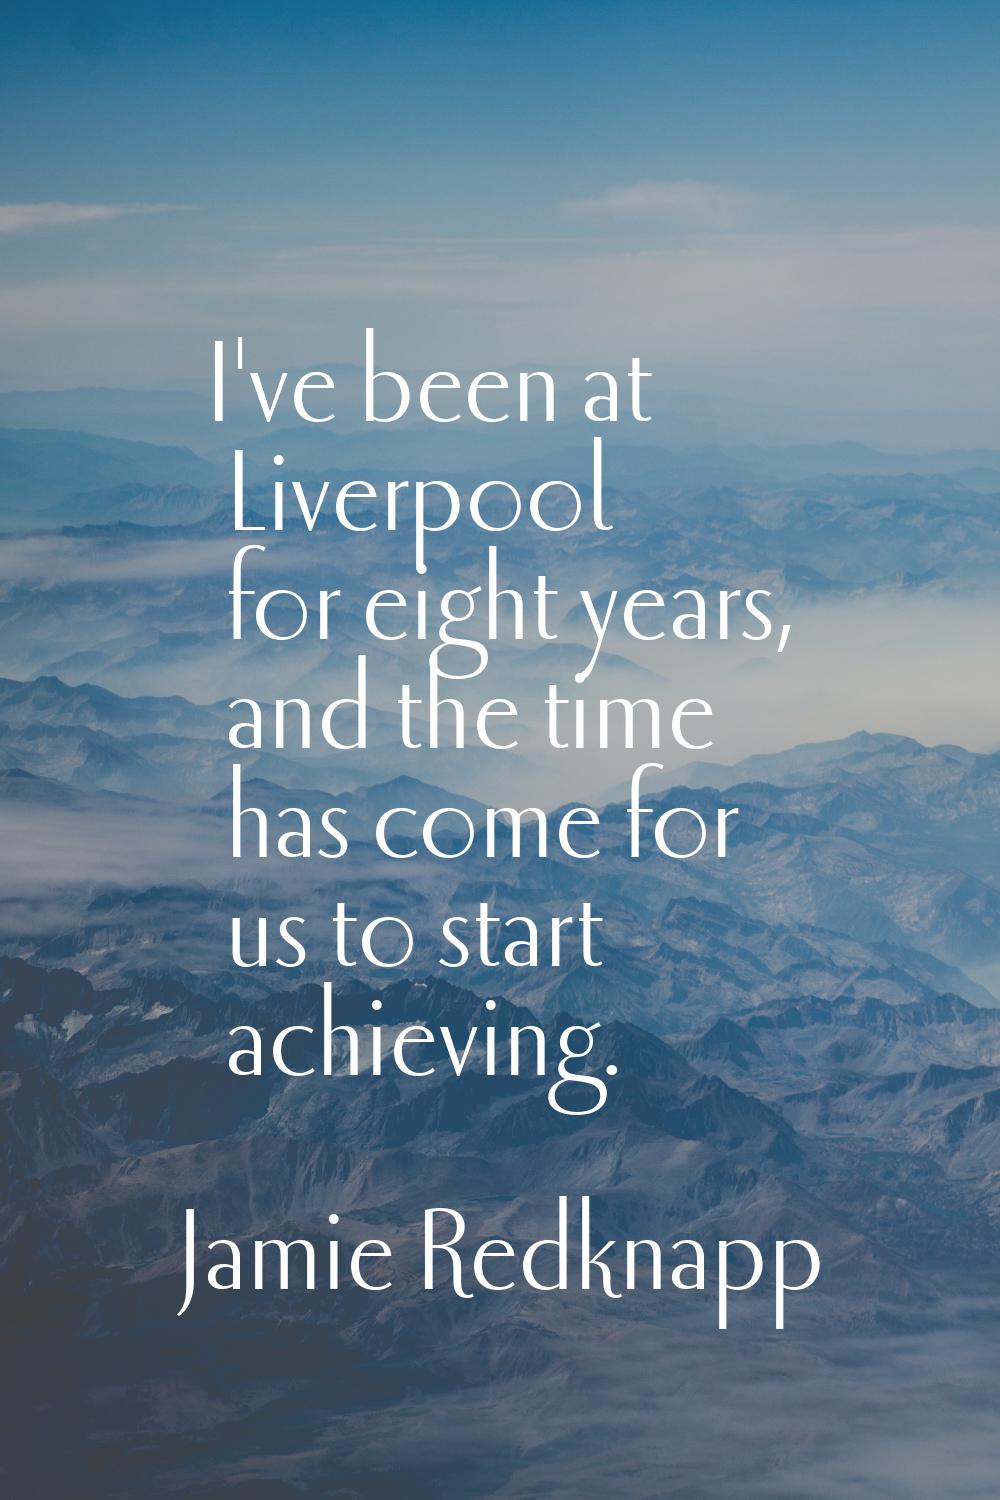 I've been at Liverpool for eight years, and the time has come for us to start achieving.